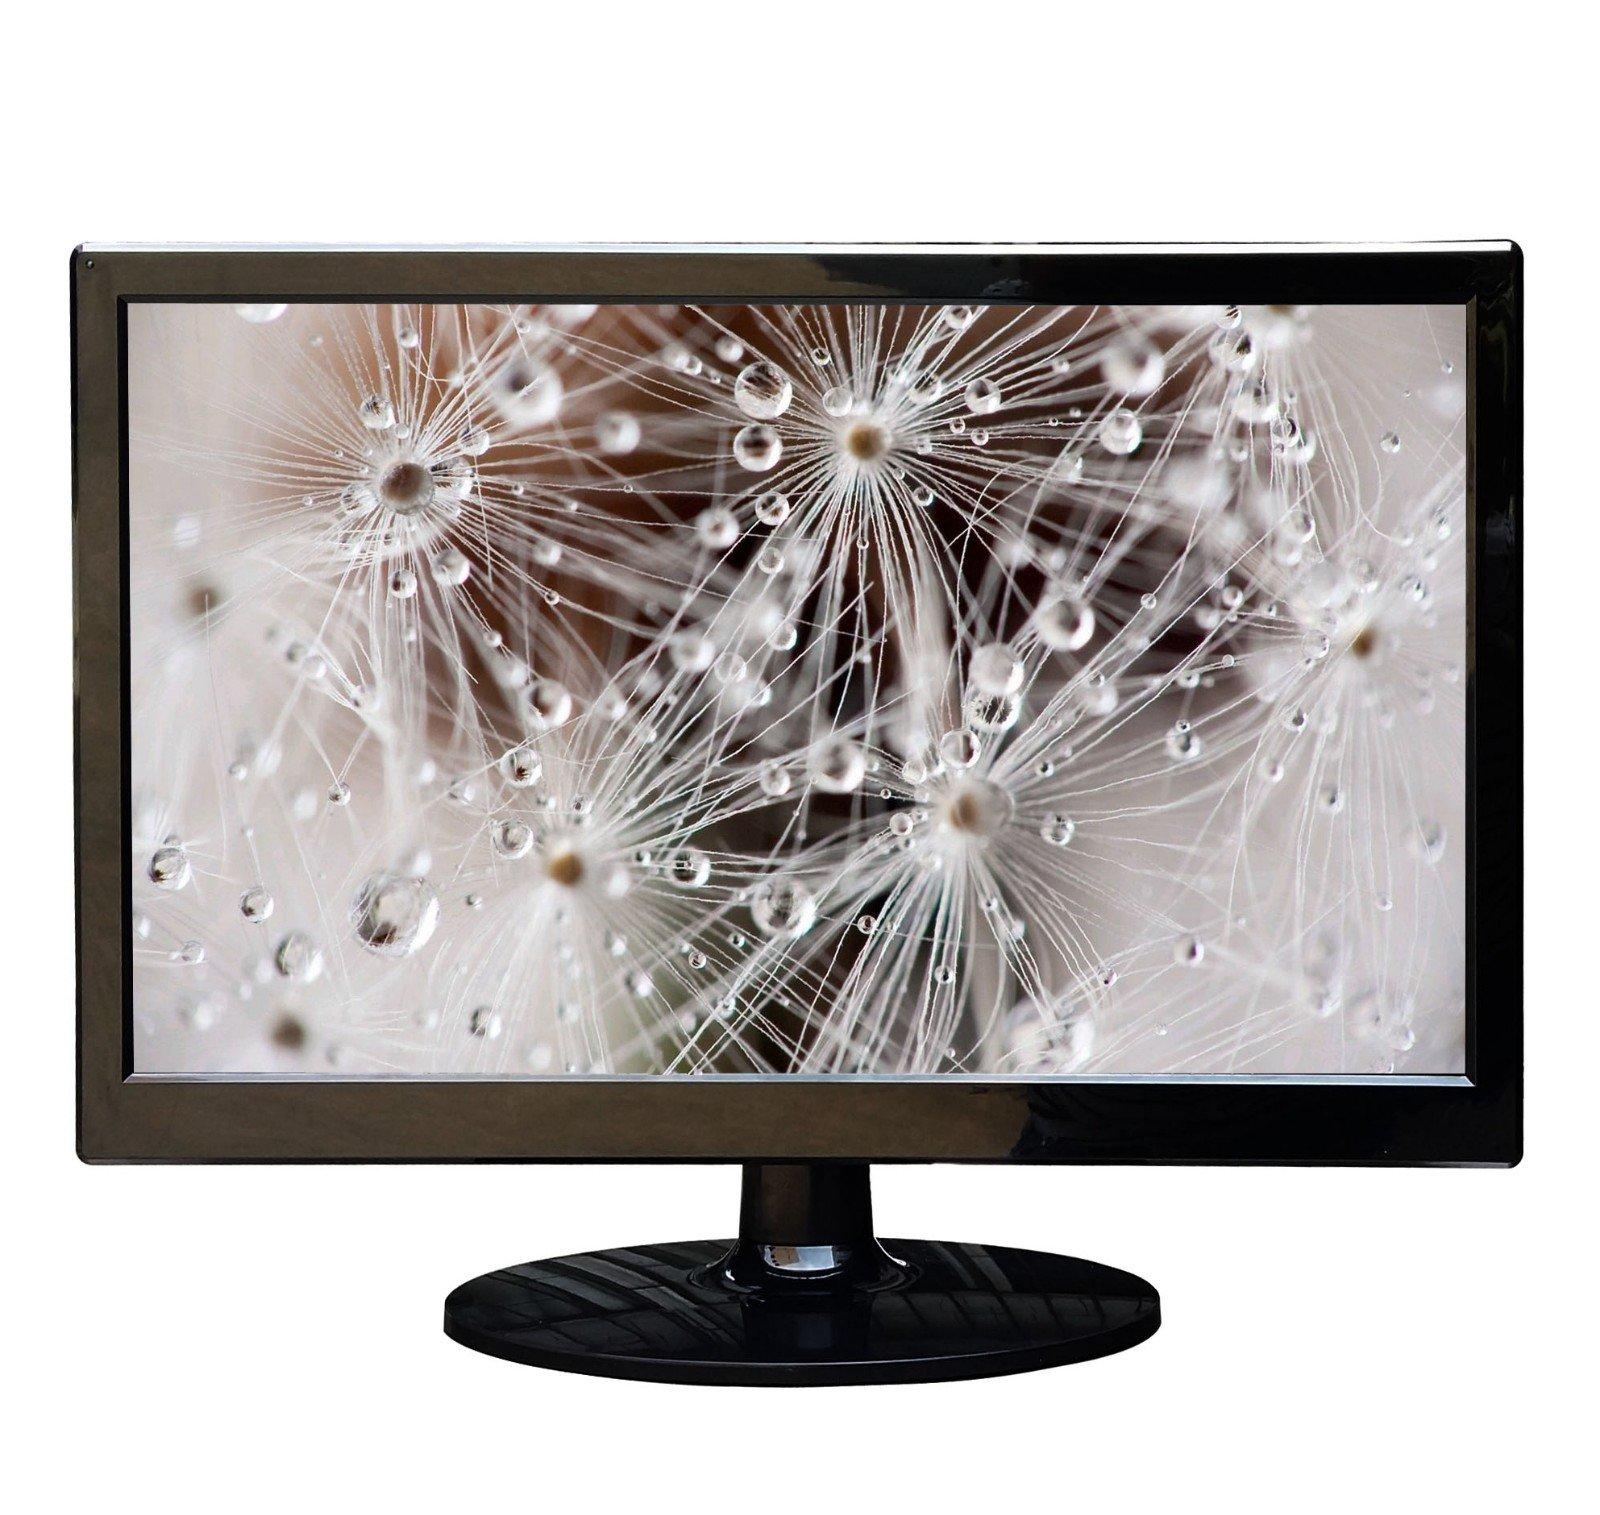 Xinyao LCD hot brand led monitor 19 inch for tv screen